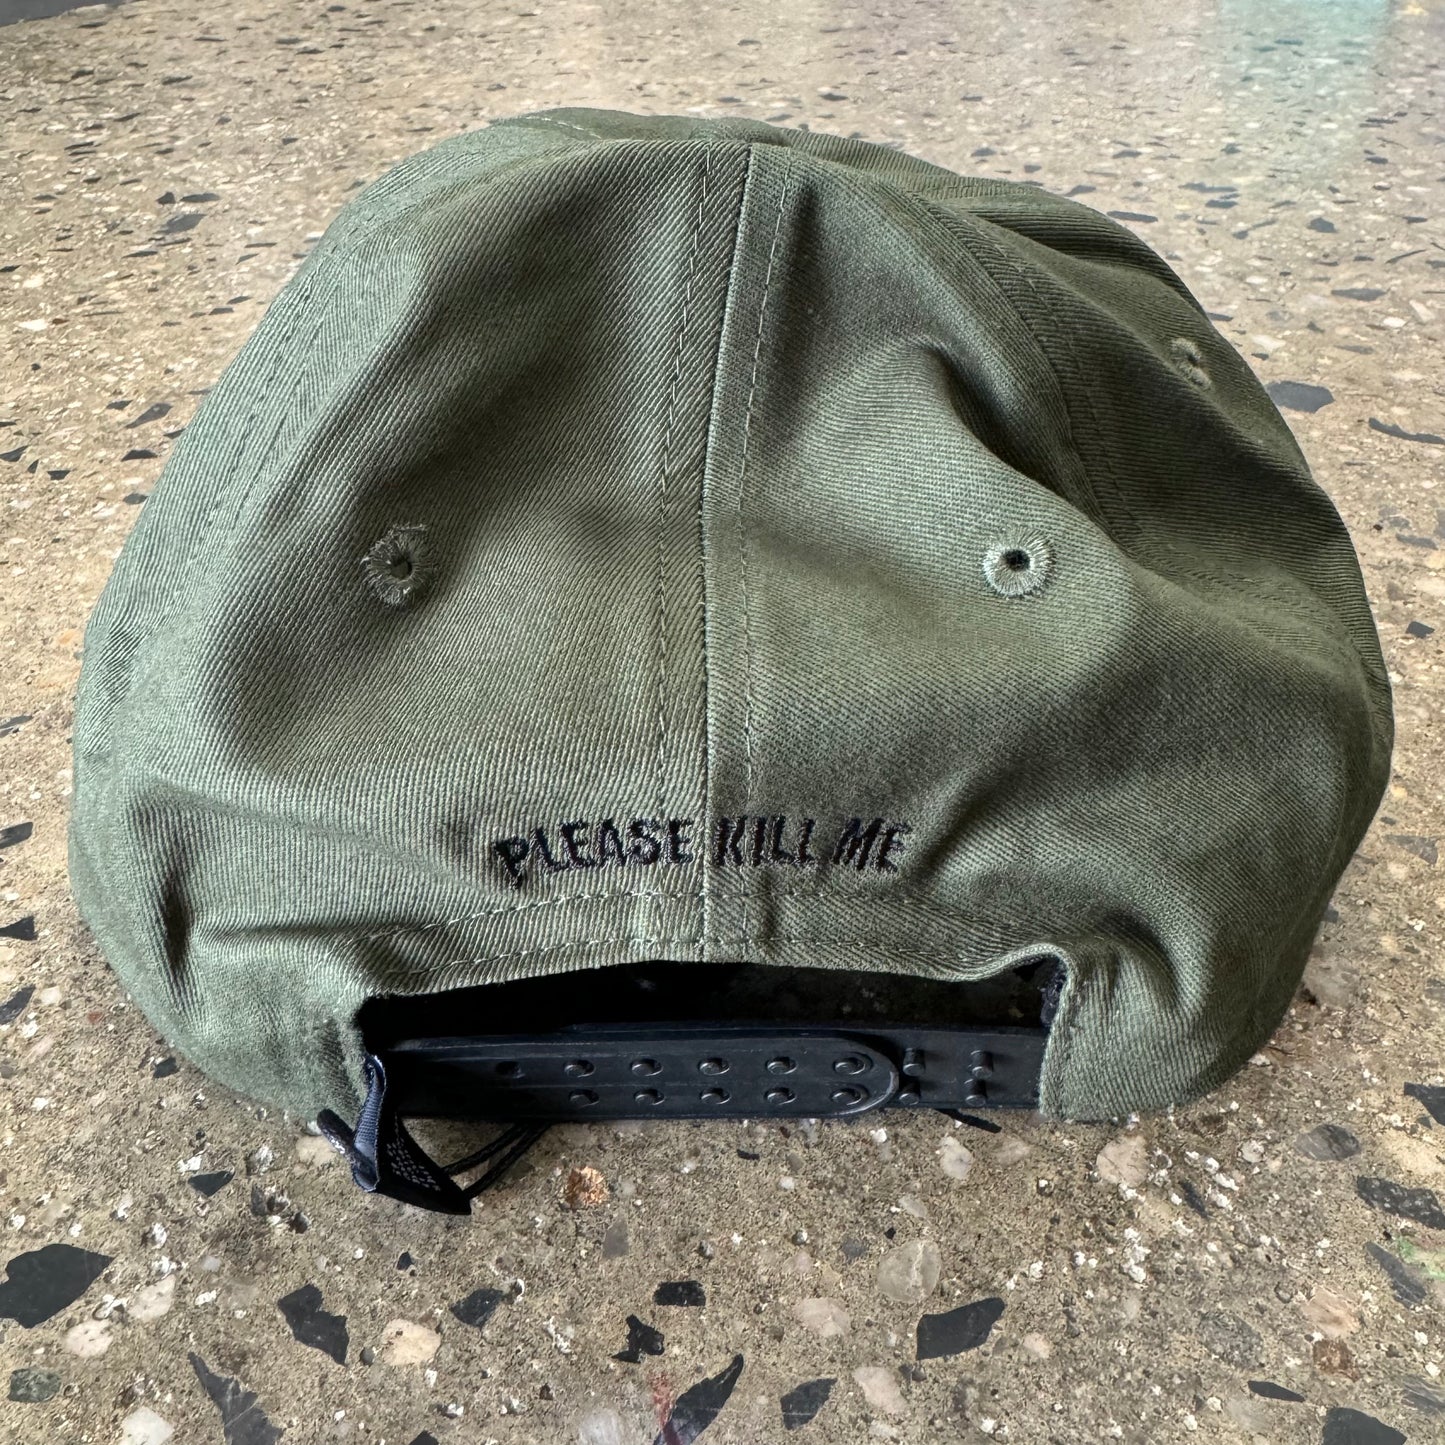 back view of green hat